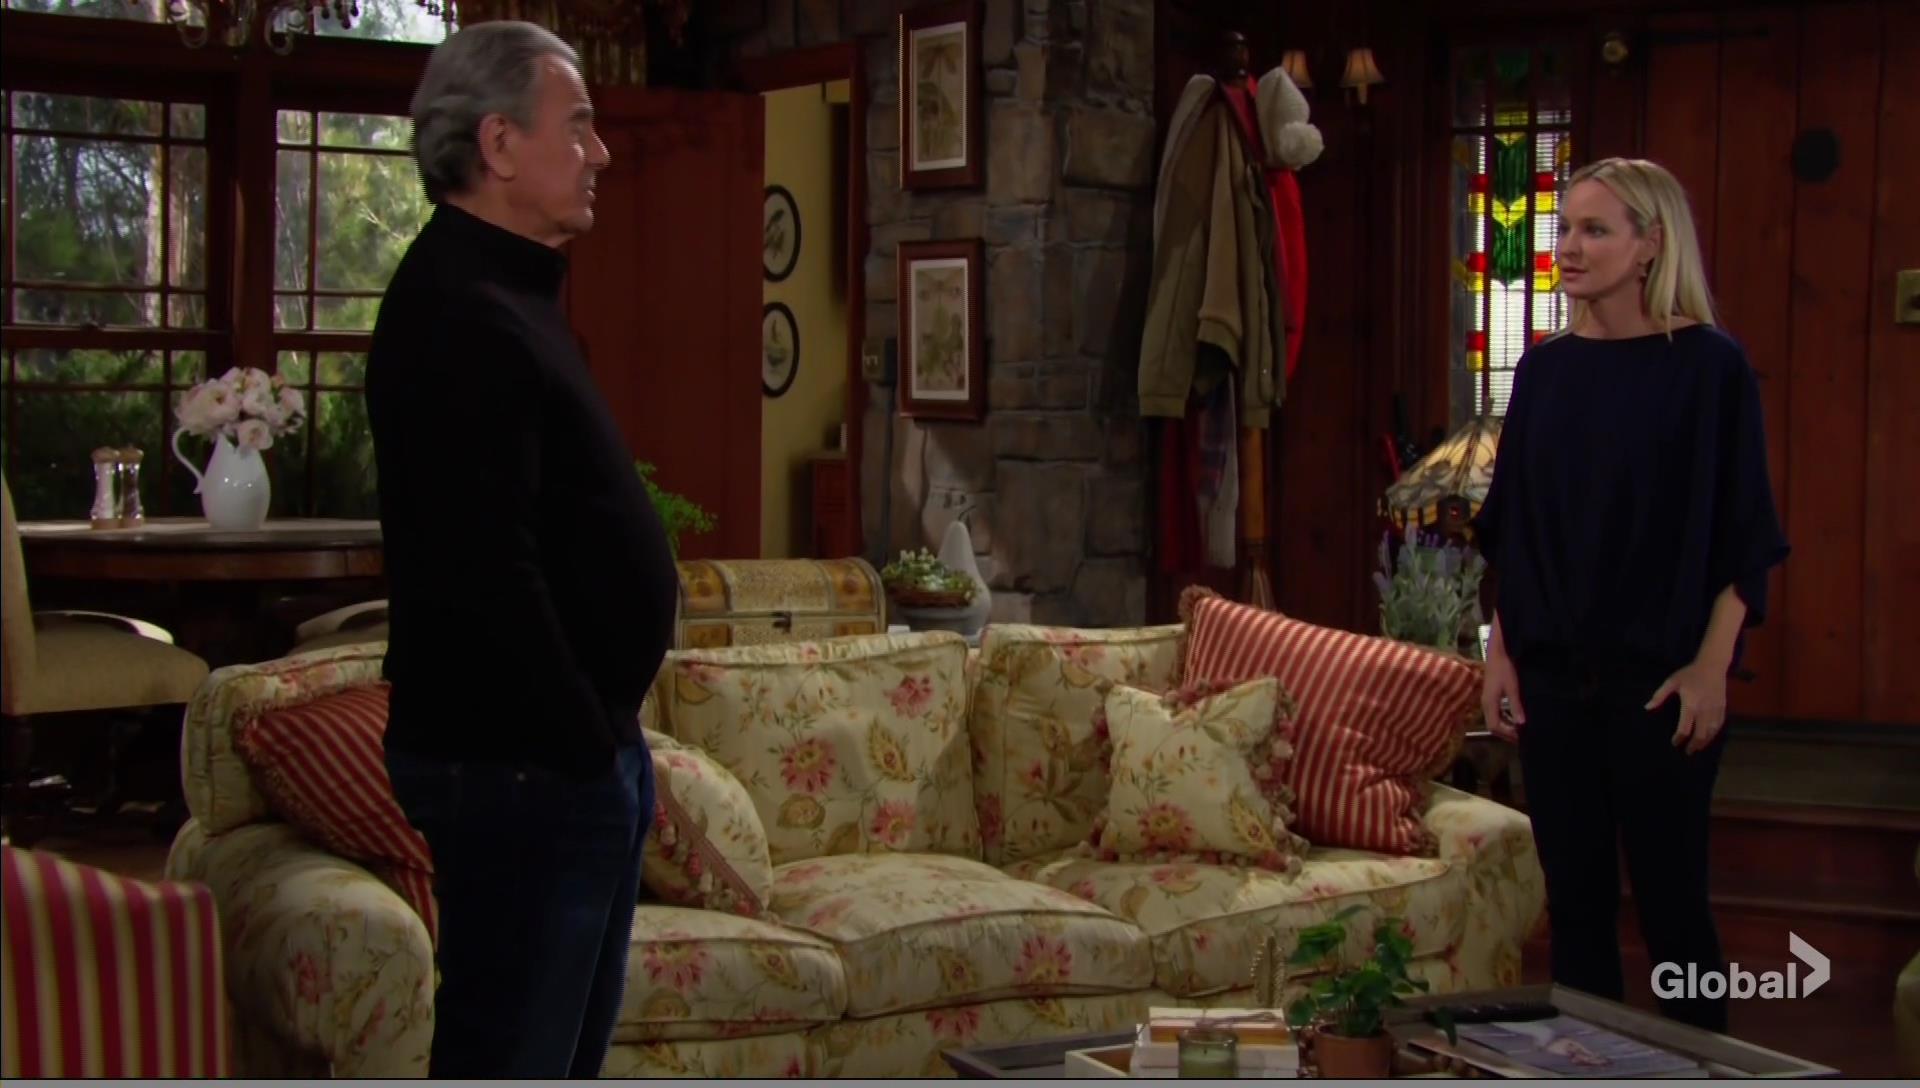 victor asks where adam is young and the restless 